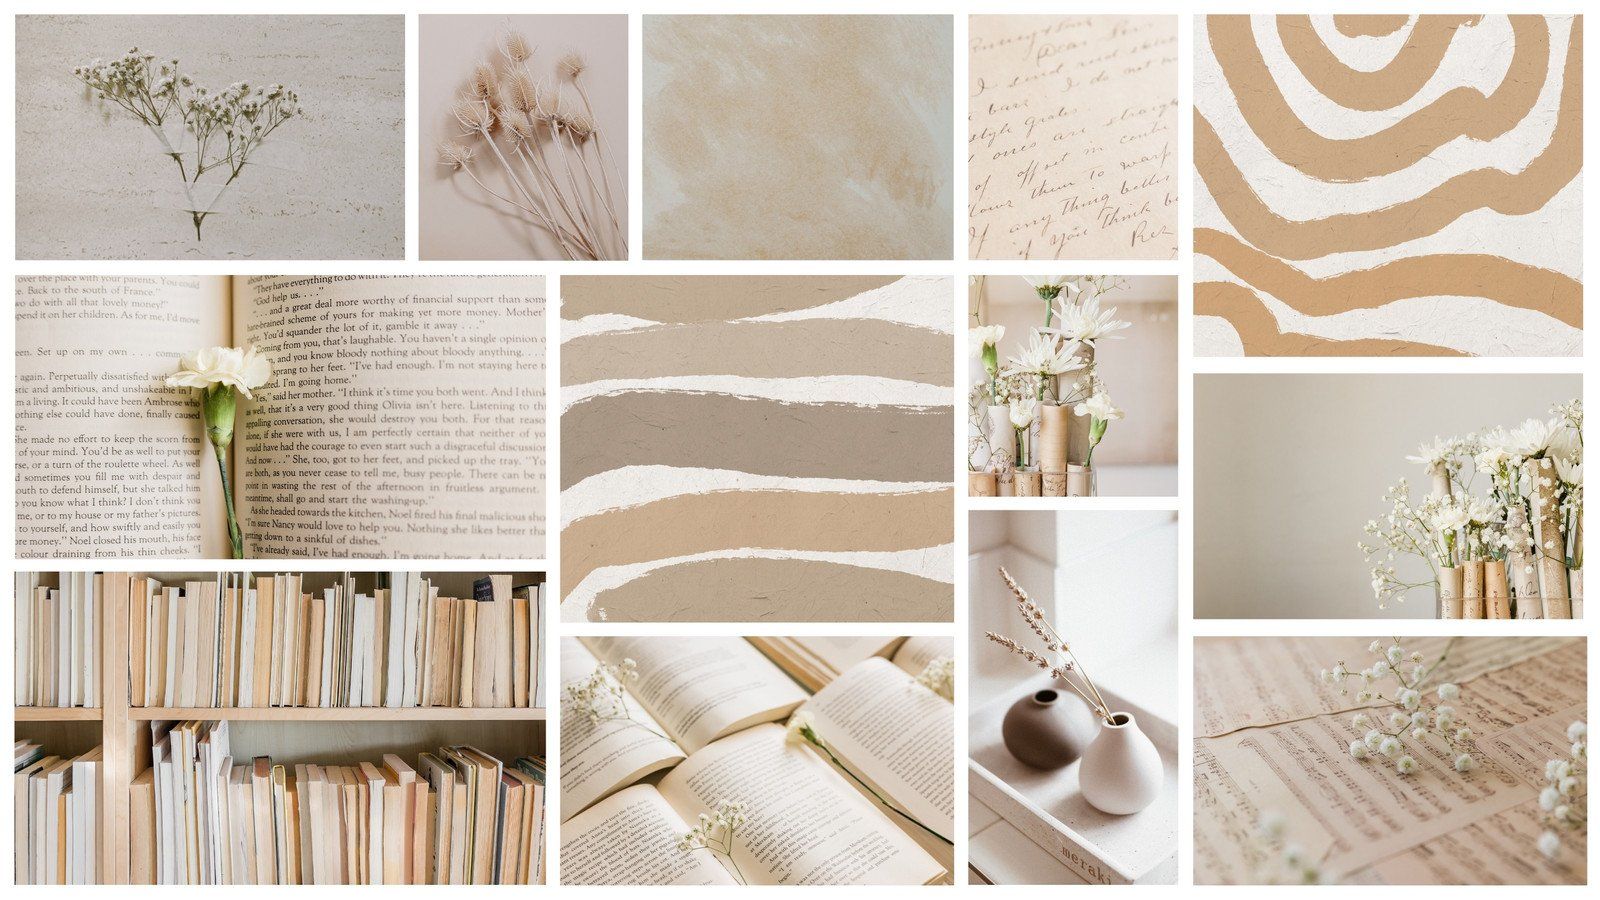 A collage of images of books, flowers, and other items in a neutral color palette. - Paper, beautiful, neutral, France, cream, gold